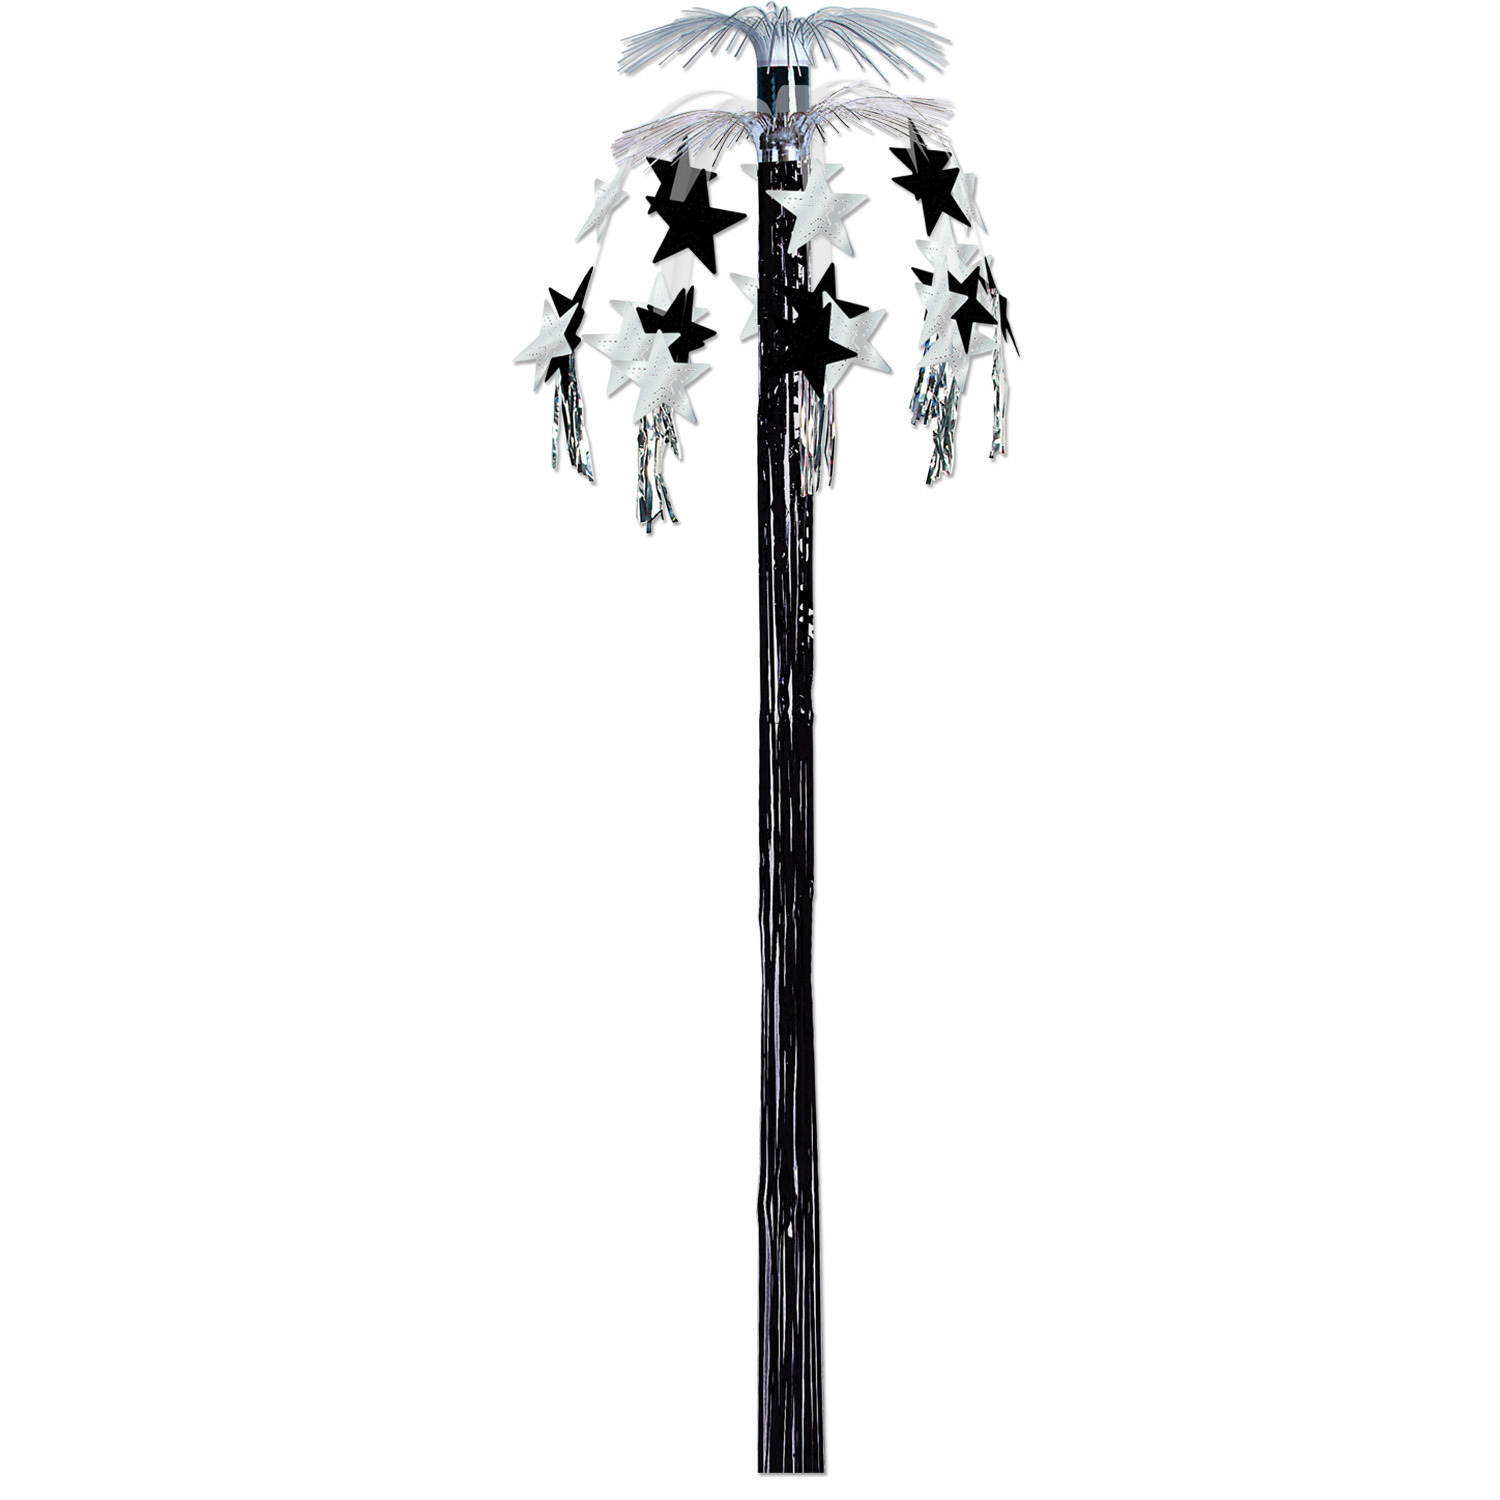 Metallic silver hanging cascade fountain with black and silver stars hanging from the top and black tassel in the center.